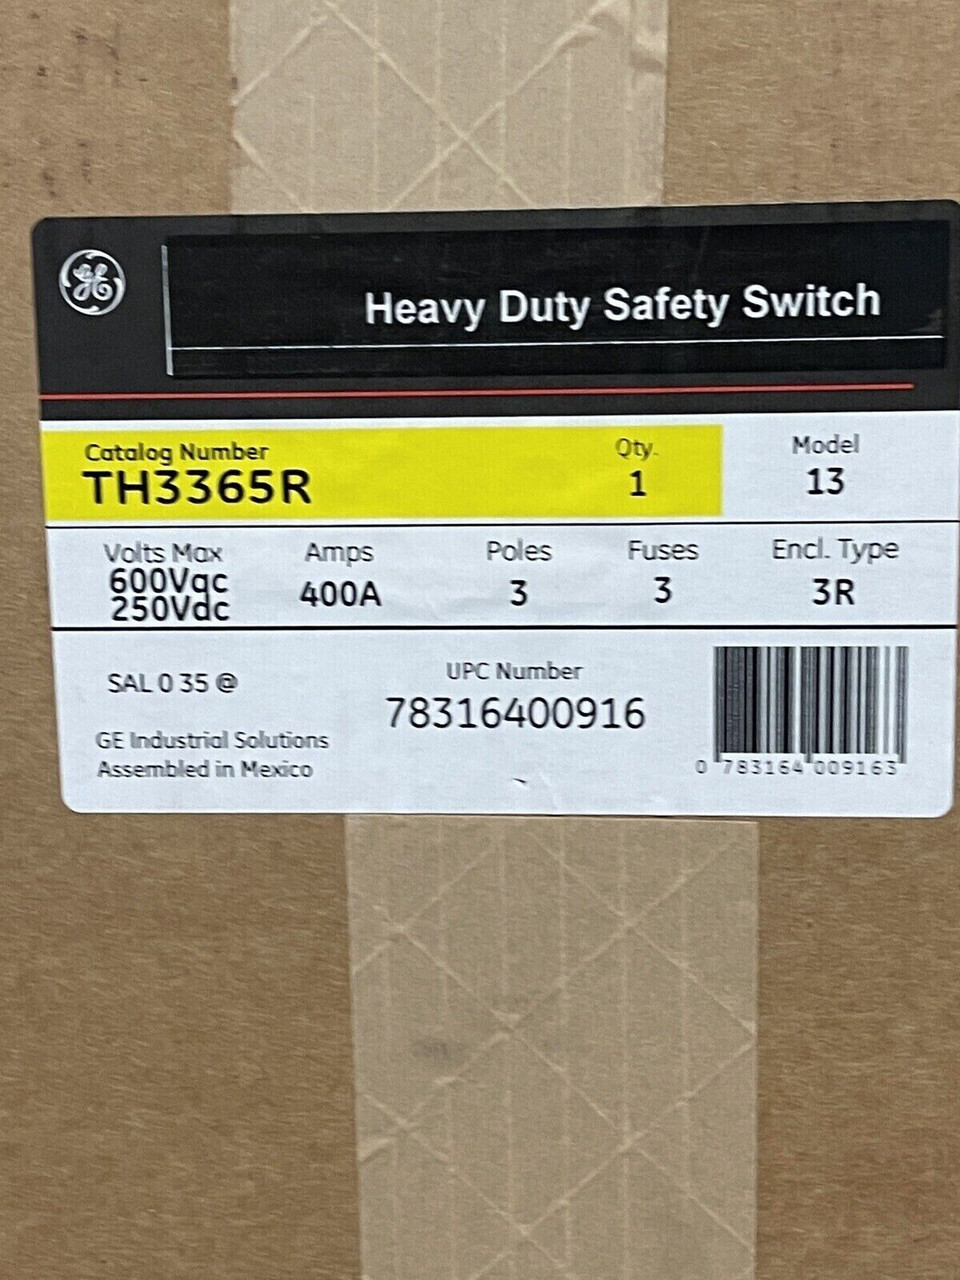 TH3365R
Outdoor Fusible 400 Amp